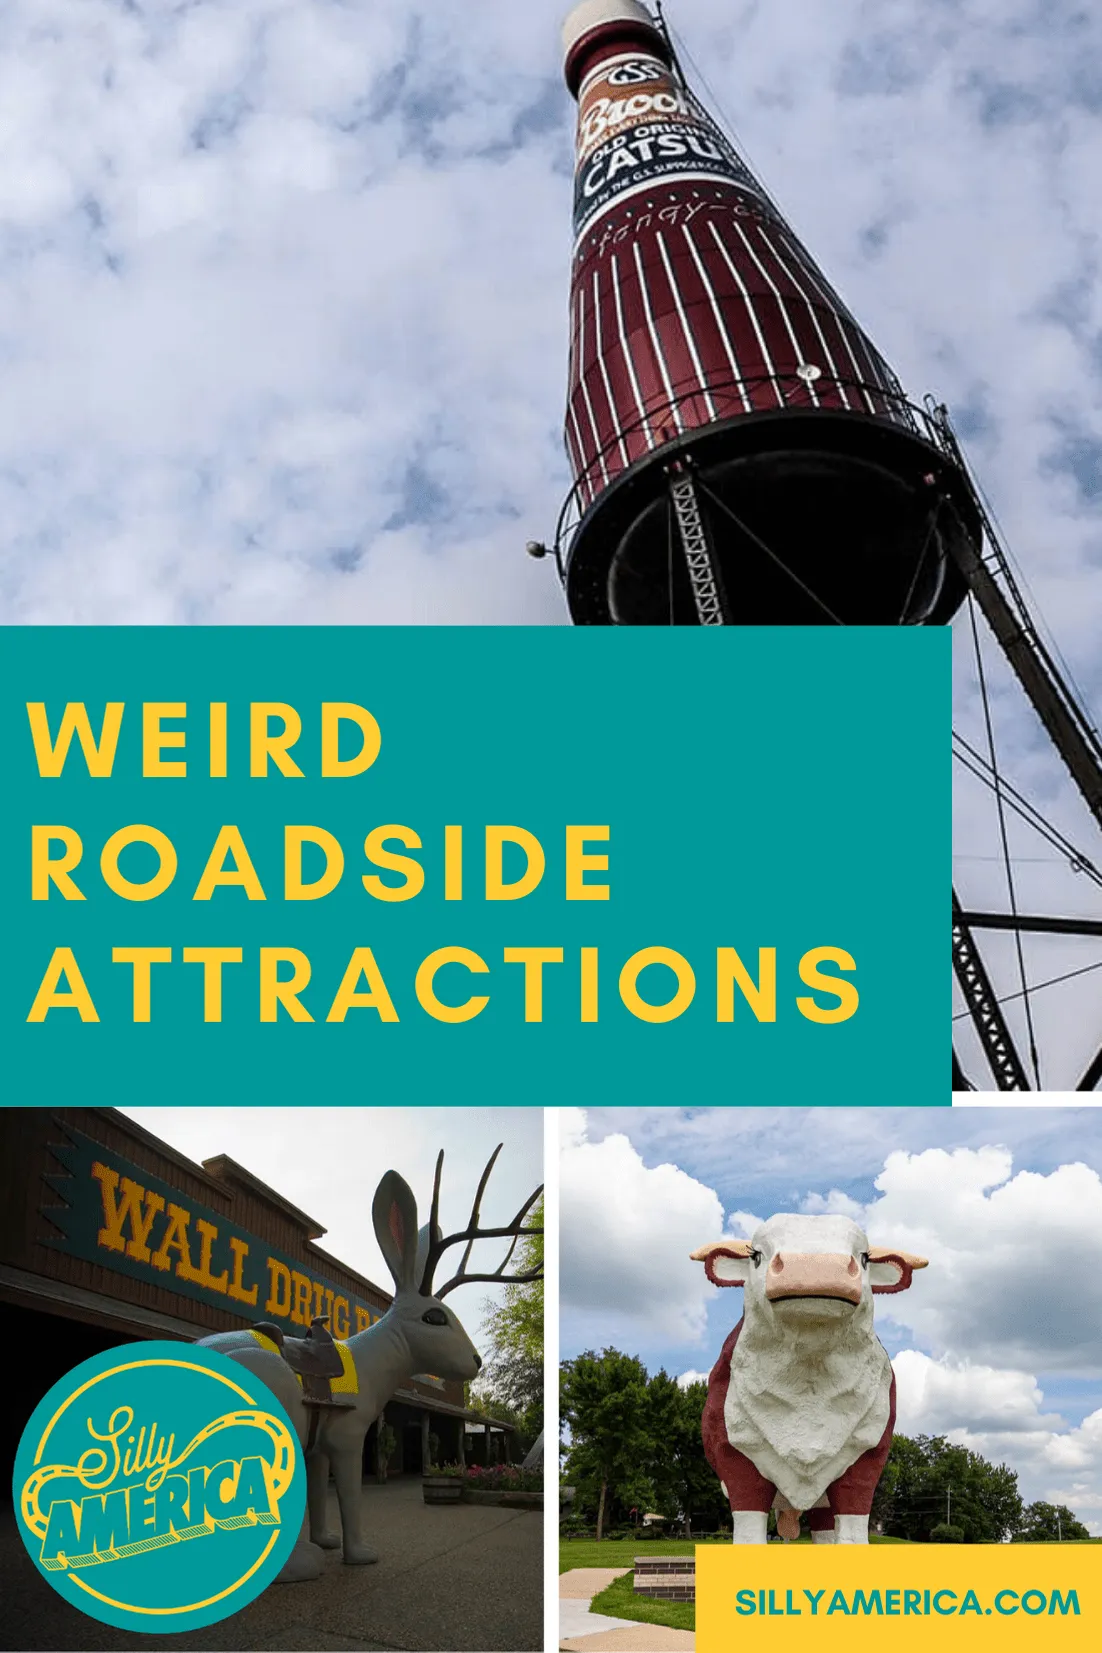 These weird roadside attractions make for fun stops on your next American road trip. Visit world's largest things, quirky outdoor art, and other oddities on a road trip around the United States! #RoadsideAttraction #RoadsideAttractions #WeirdRoadsideAttractions #VintageRoadsideAttractions #RoadTripStops #WorldsLargestRoadsideAttractions #RoadTrip #USARoadsideAttractions #AmericanRoadsideAttractions #USA #America